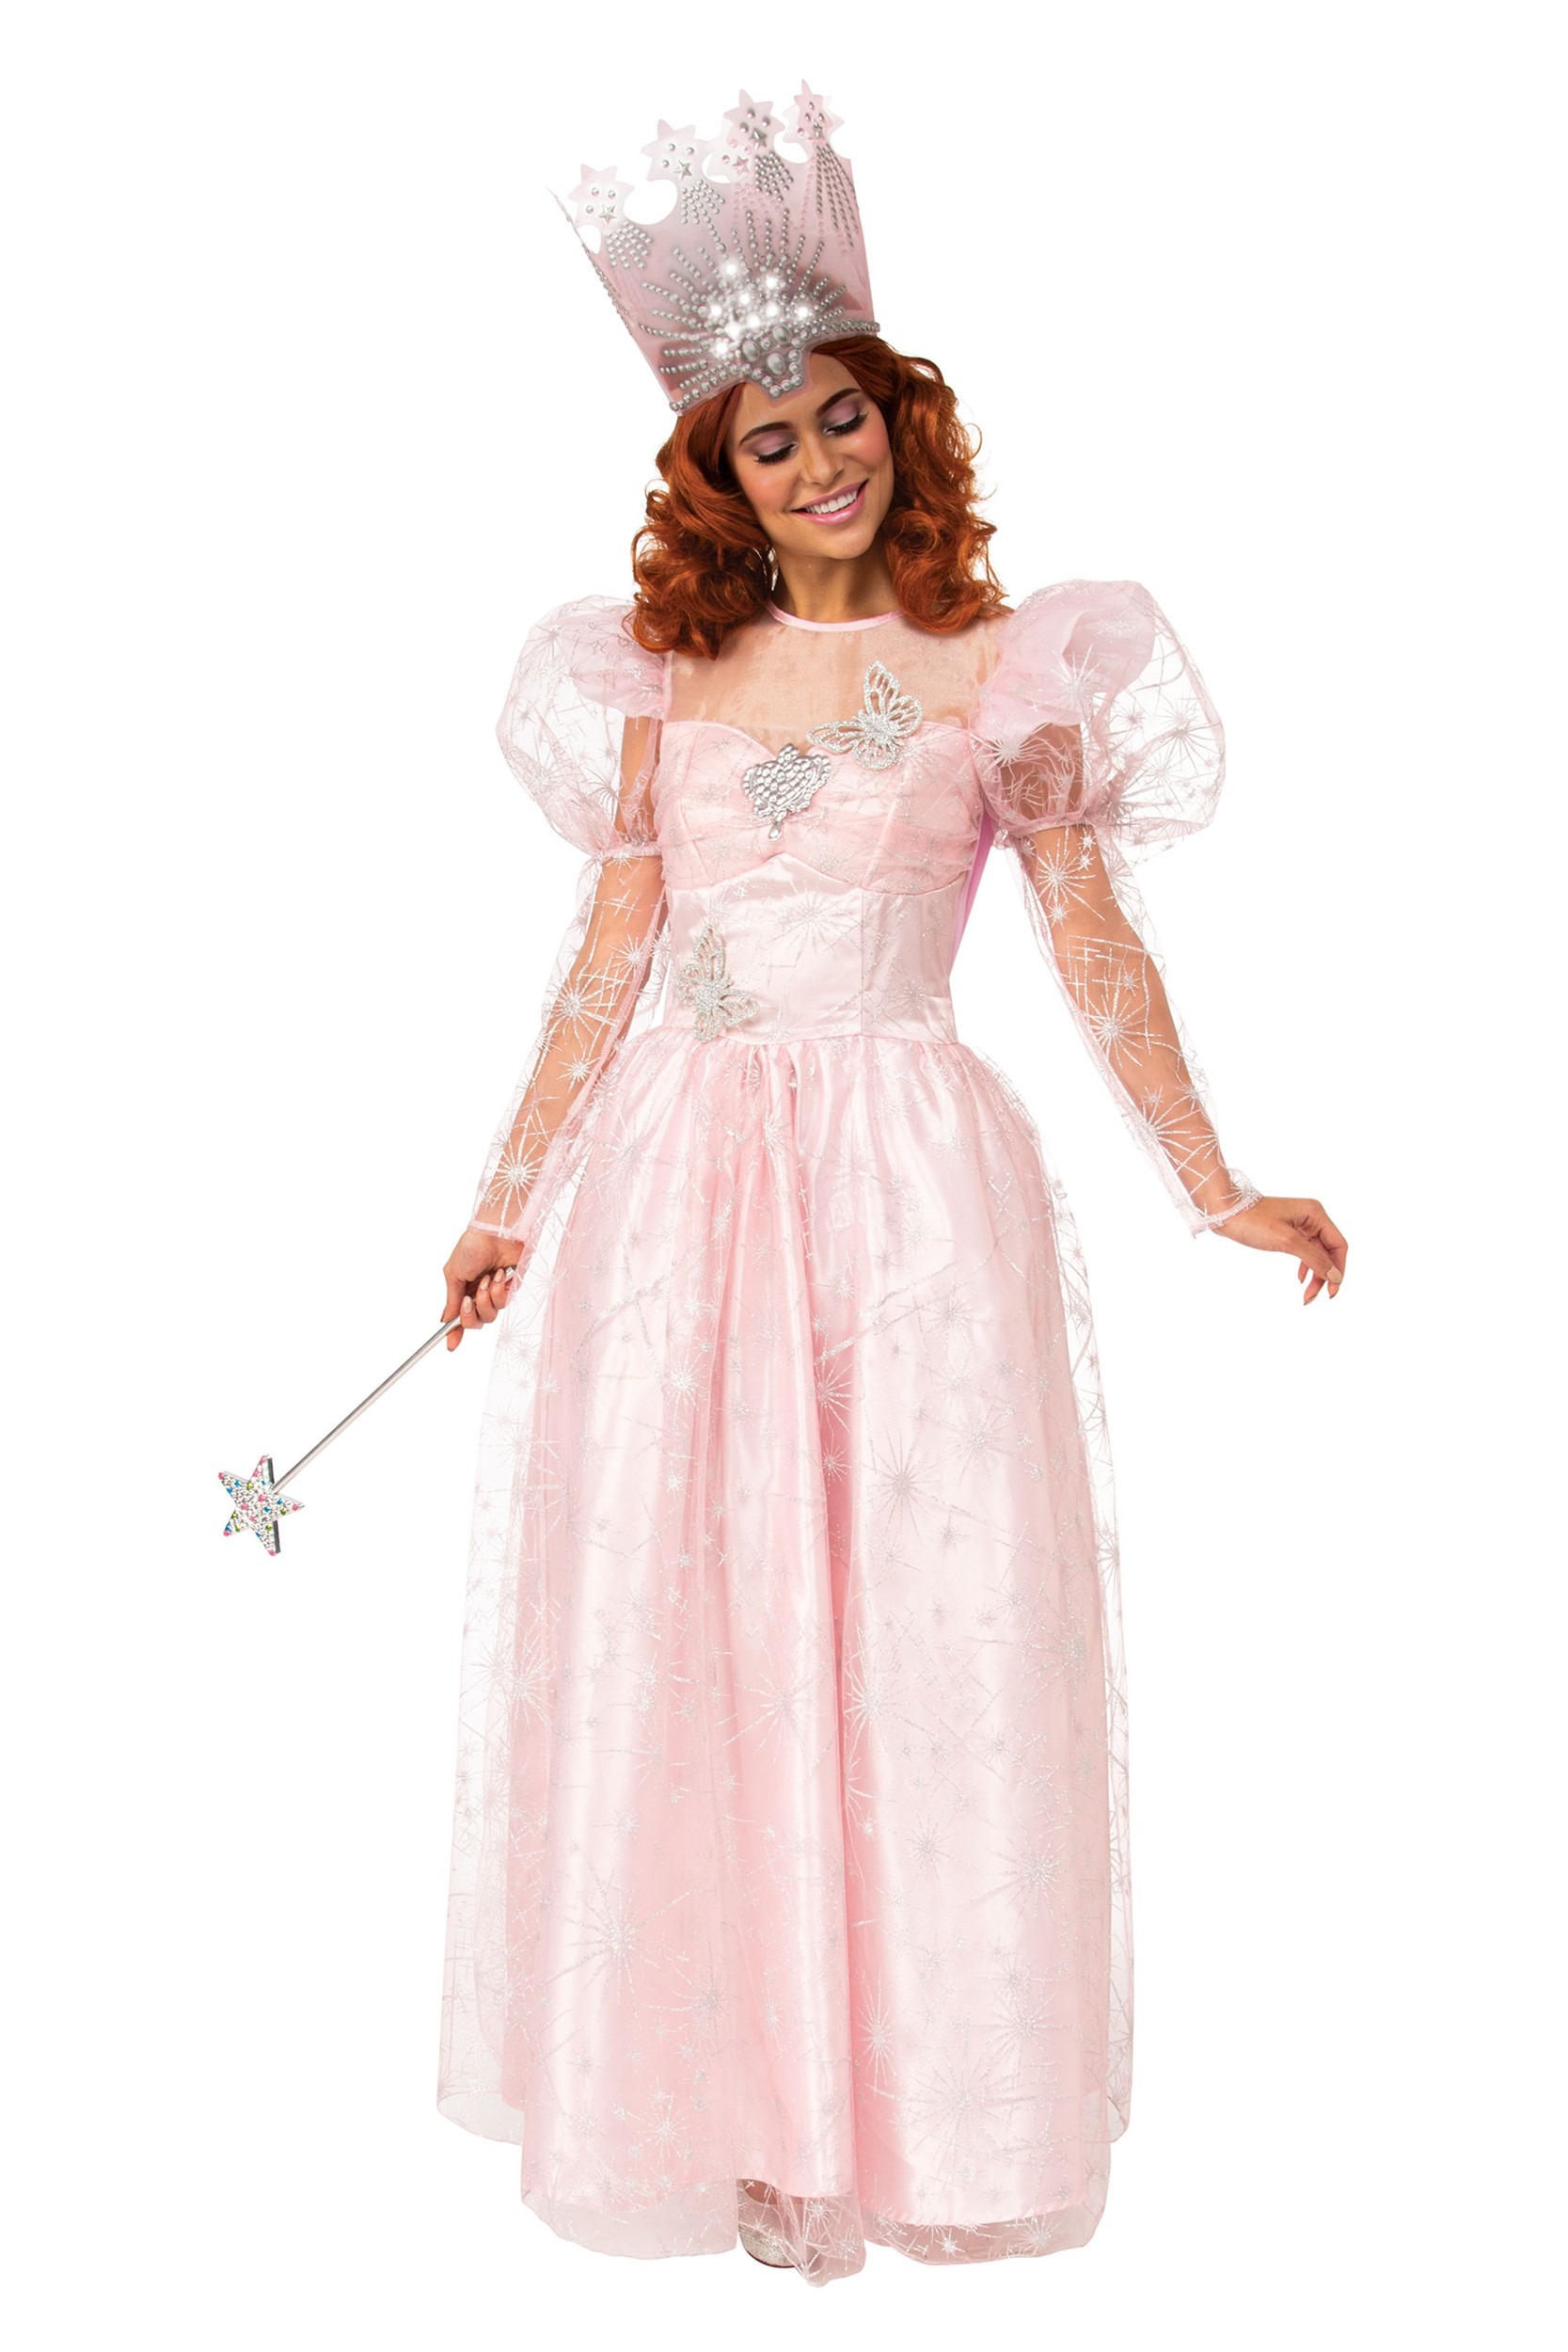 Image of Glinda the Good Witch Women's Deluxe Costume ID RU701927-L